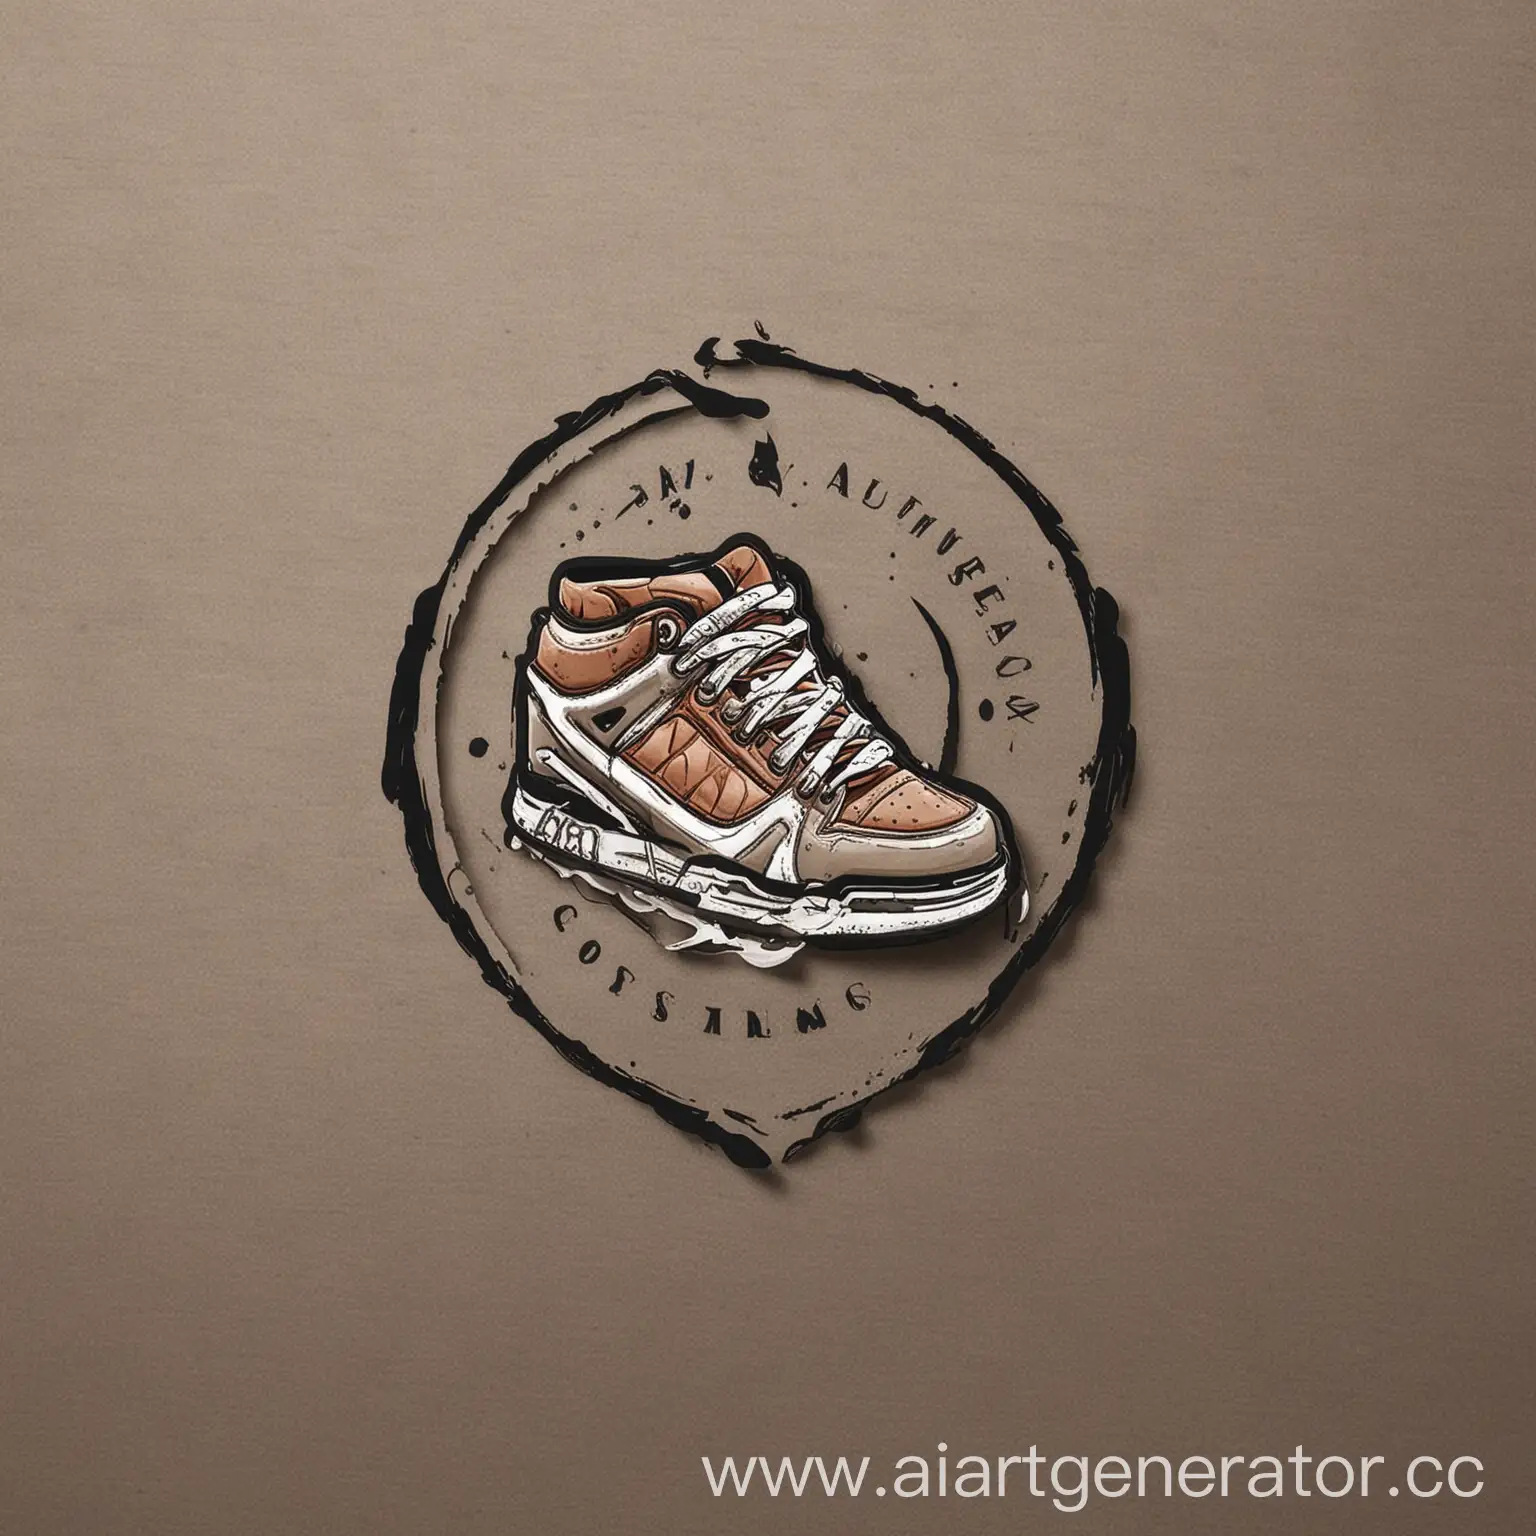 Modern-and-Stylish-Sneaker-Store-Logo-Reflecting-Comfort-Quality-and-Individuality